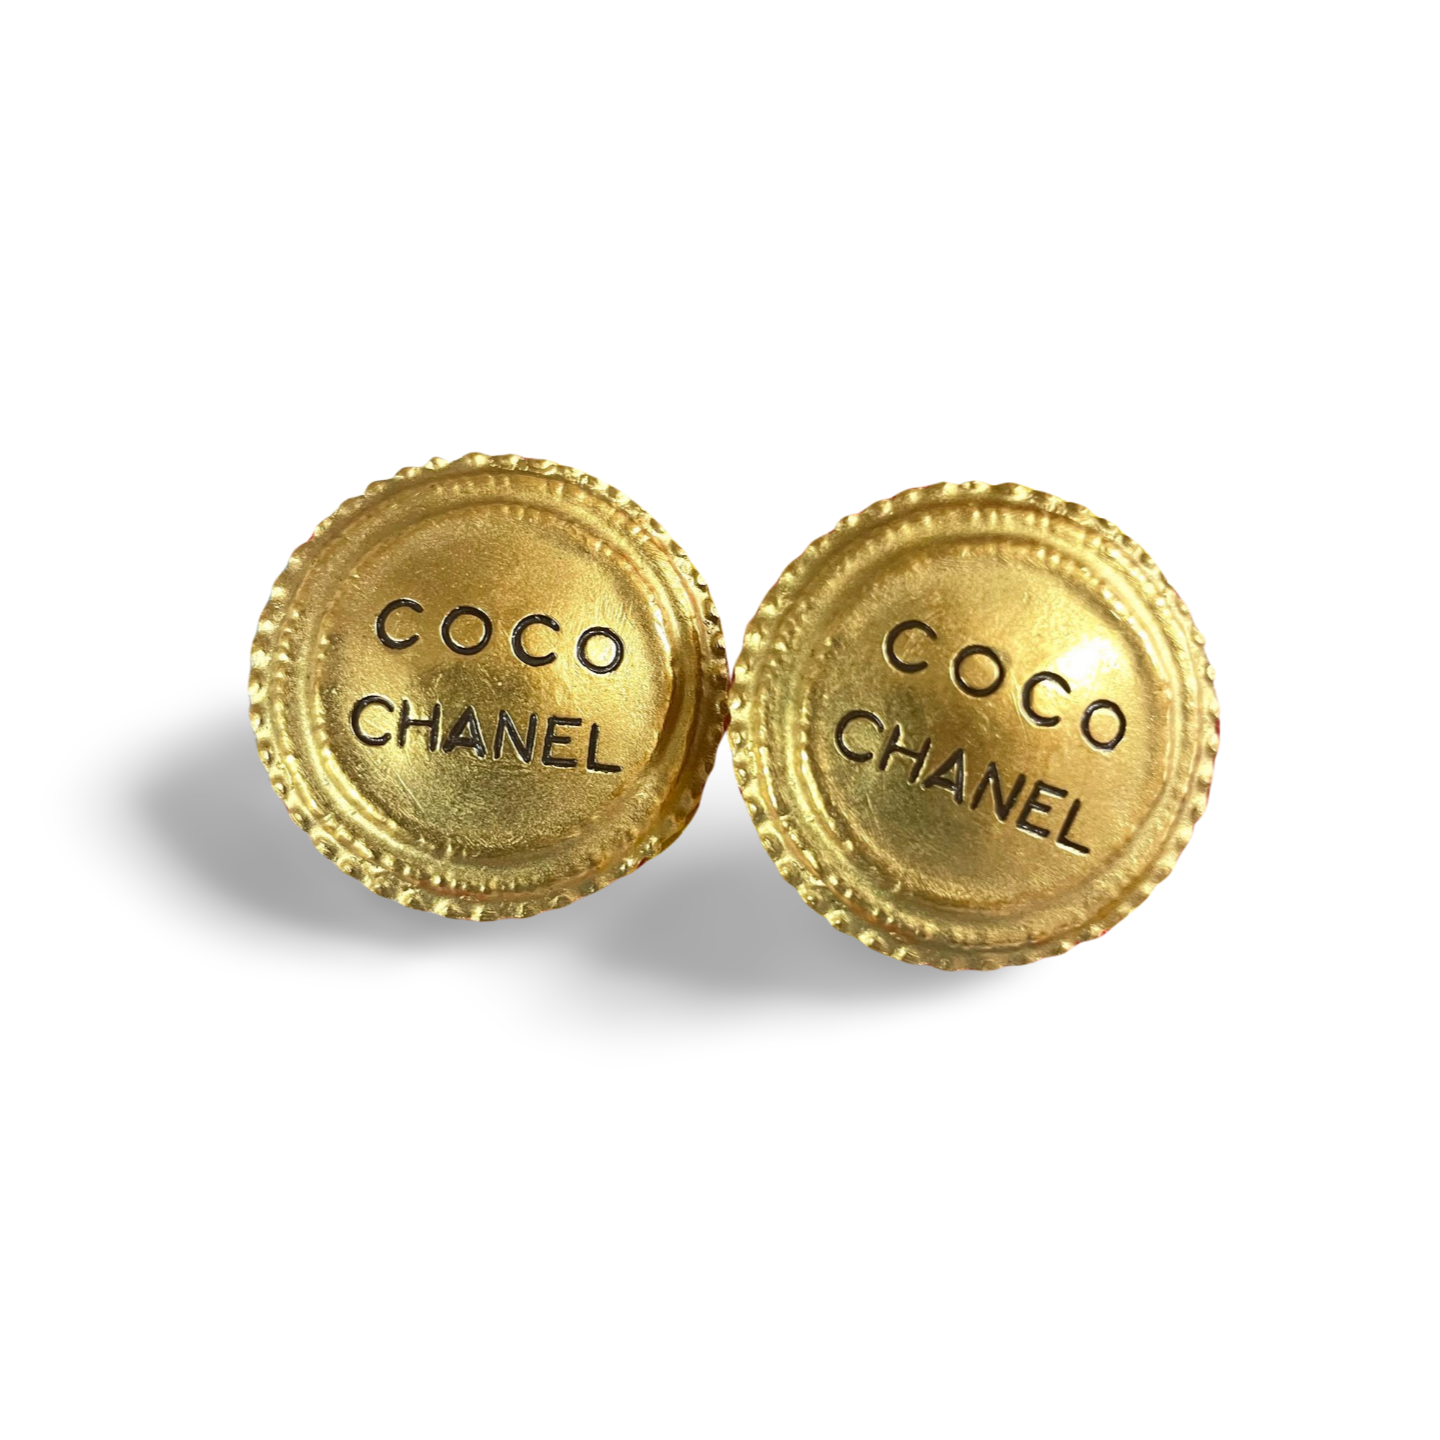 Vintage CHANEL golden round earrings with logo. Cookie biscuit design. Unique and fun jewelry. 050630ya1